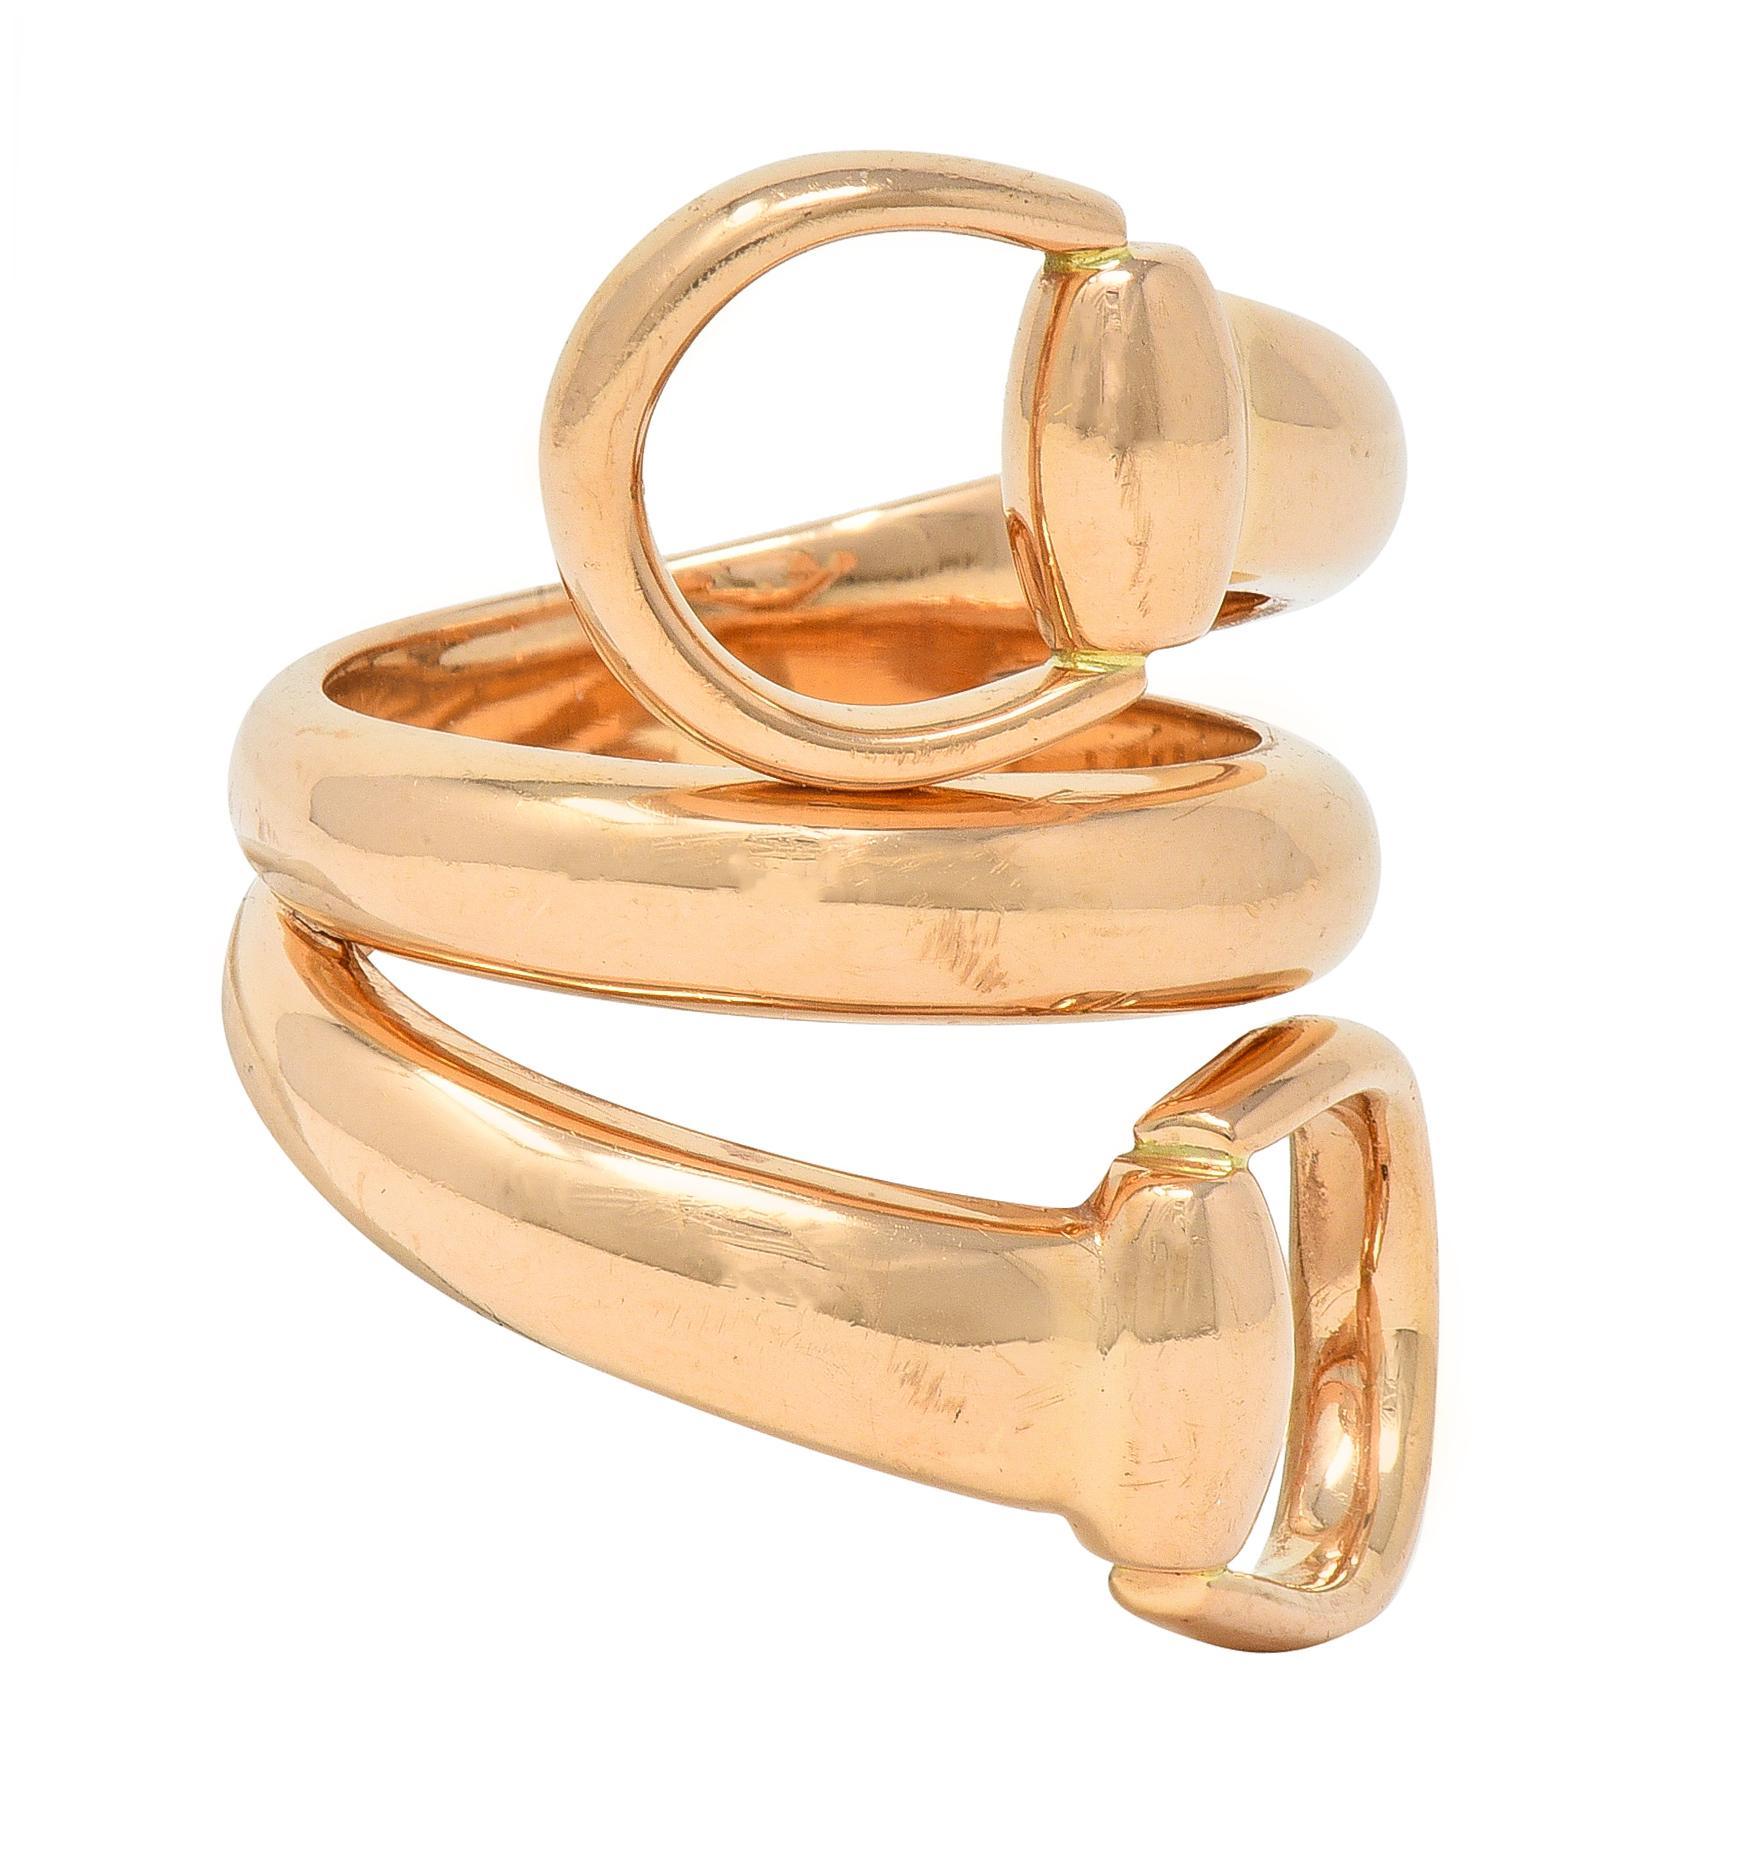 Designed as a bypass-style wrap ring
Terminating with stylized horsebits
Completed with high polish finish 
Stamped for 18 karat gold
Fully signed for Gucci
Circa: 2000s
Ring size: 6 1/2 and not sizable 
Measures north to south 29.5 mm and sits 4.0